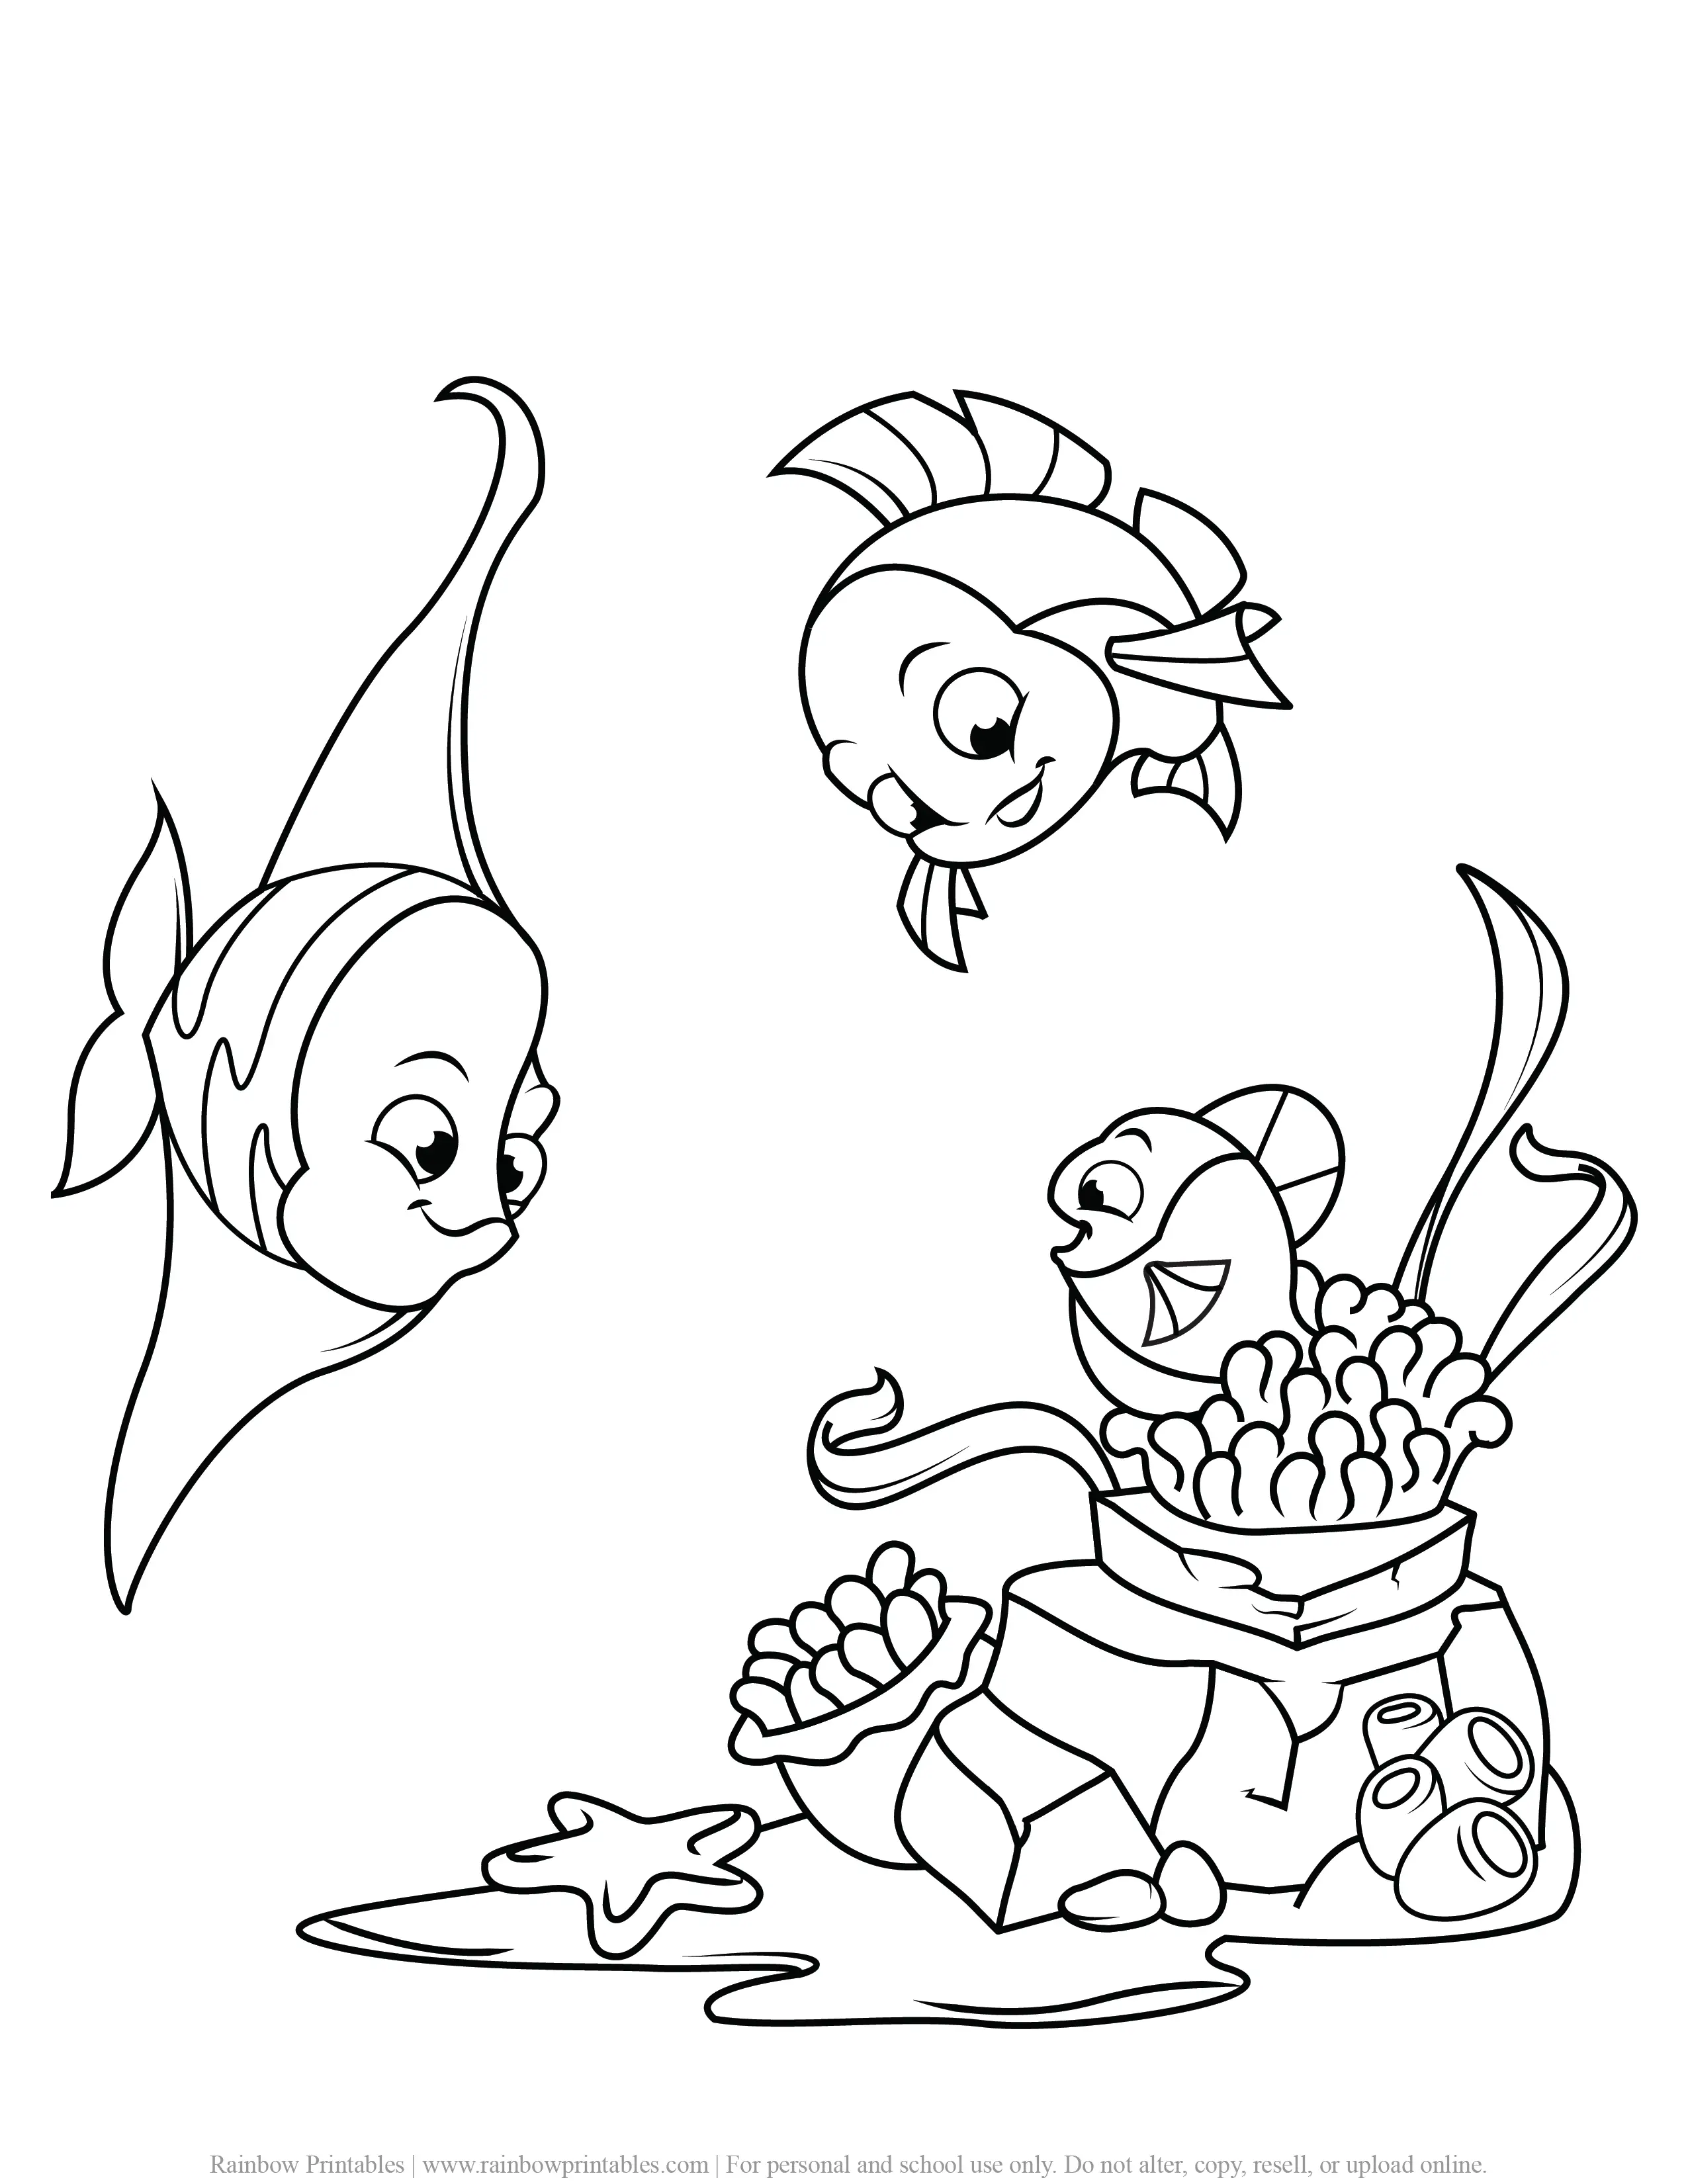 UNDER THE SEA SHARK WHALE COLORING PAGES FOR KIDS PRINTABLE ACTIVITY